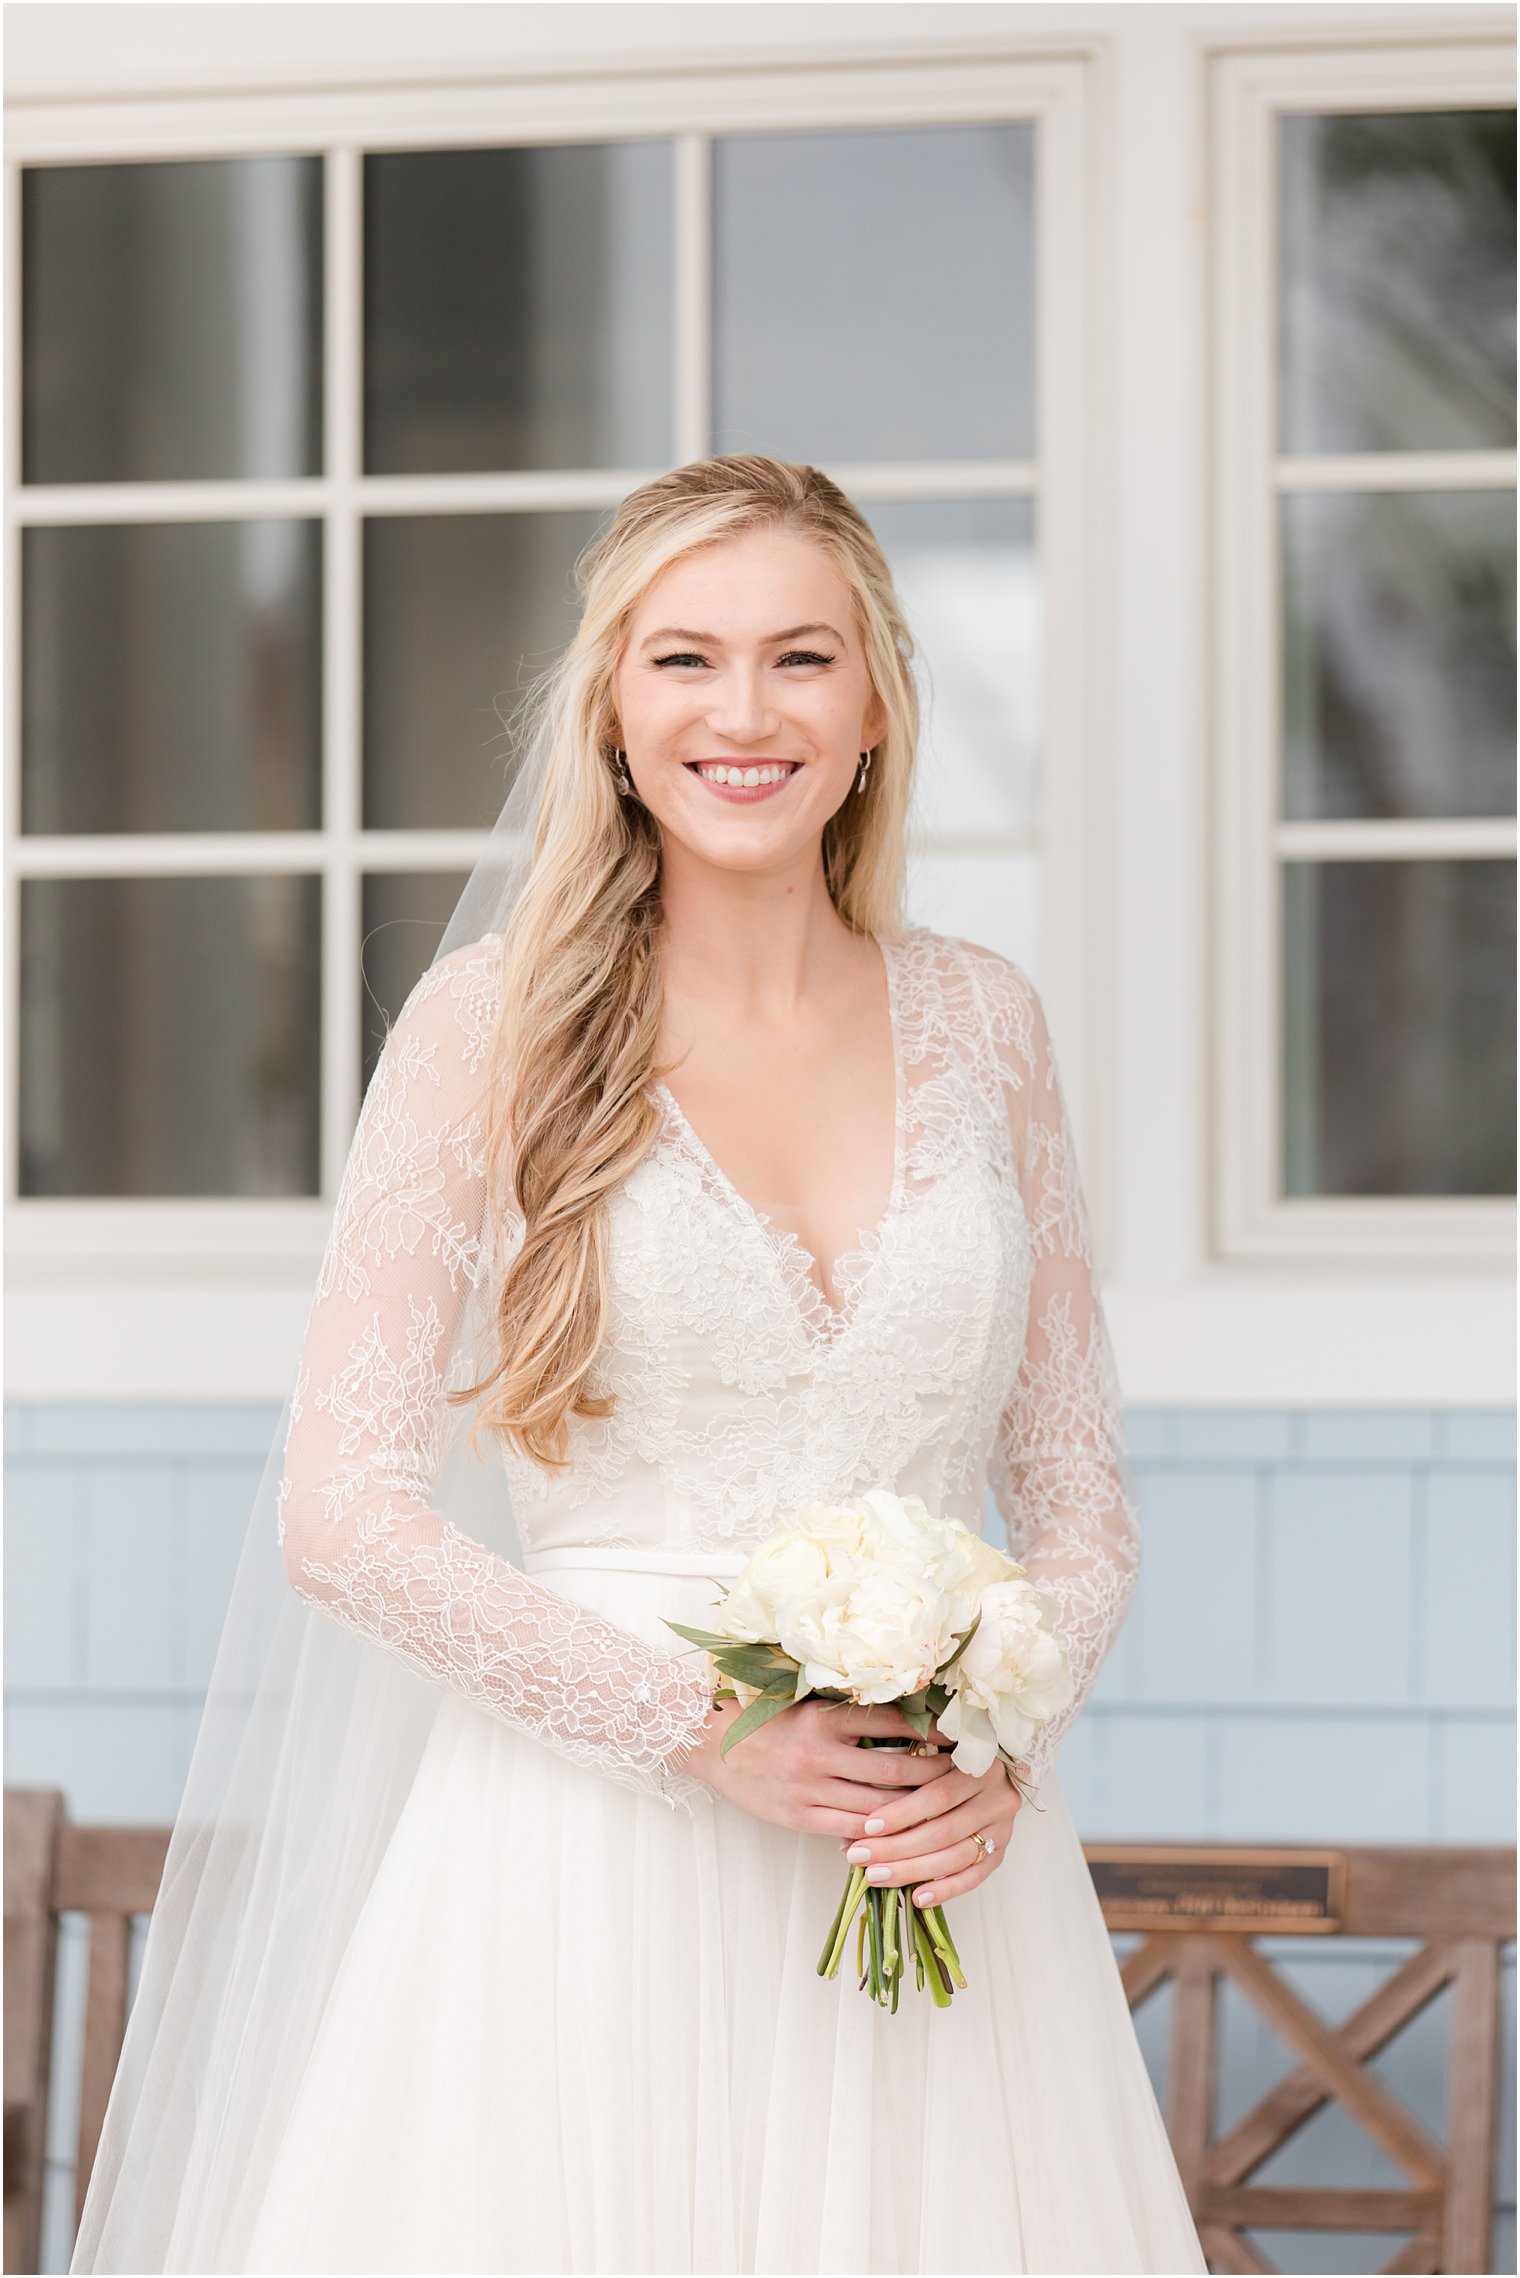 bride in wedding dress with lace sleeves holds small bouquet of white flowers